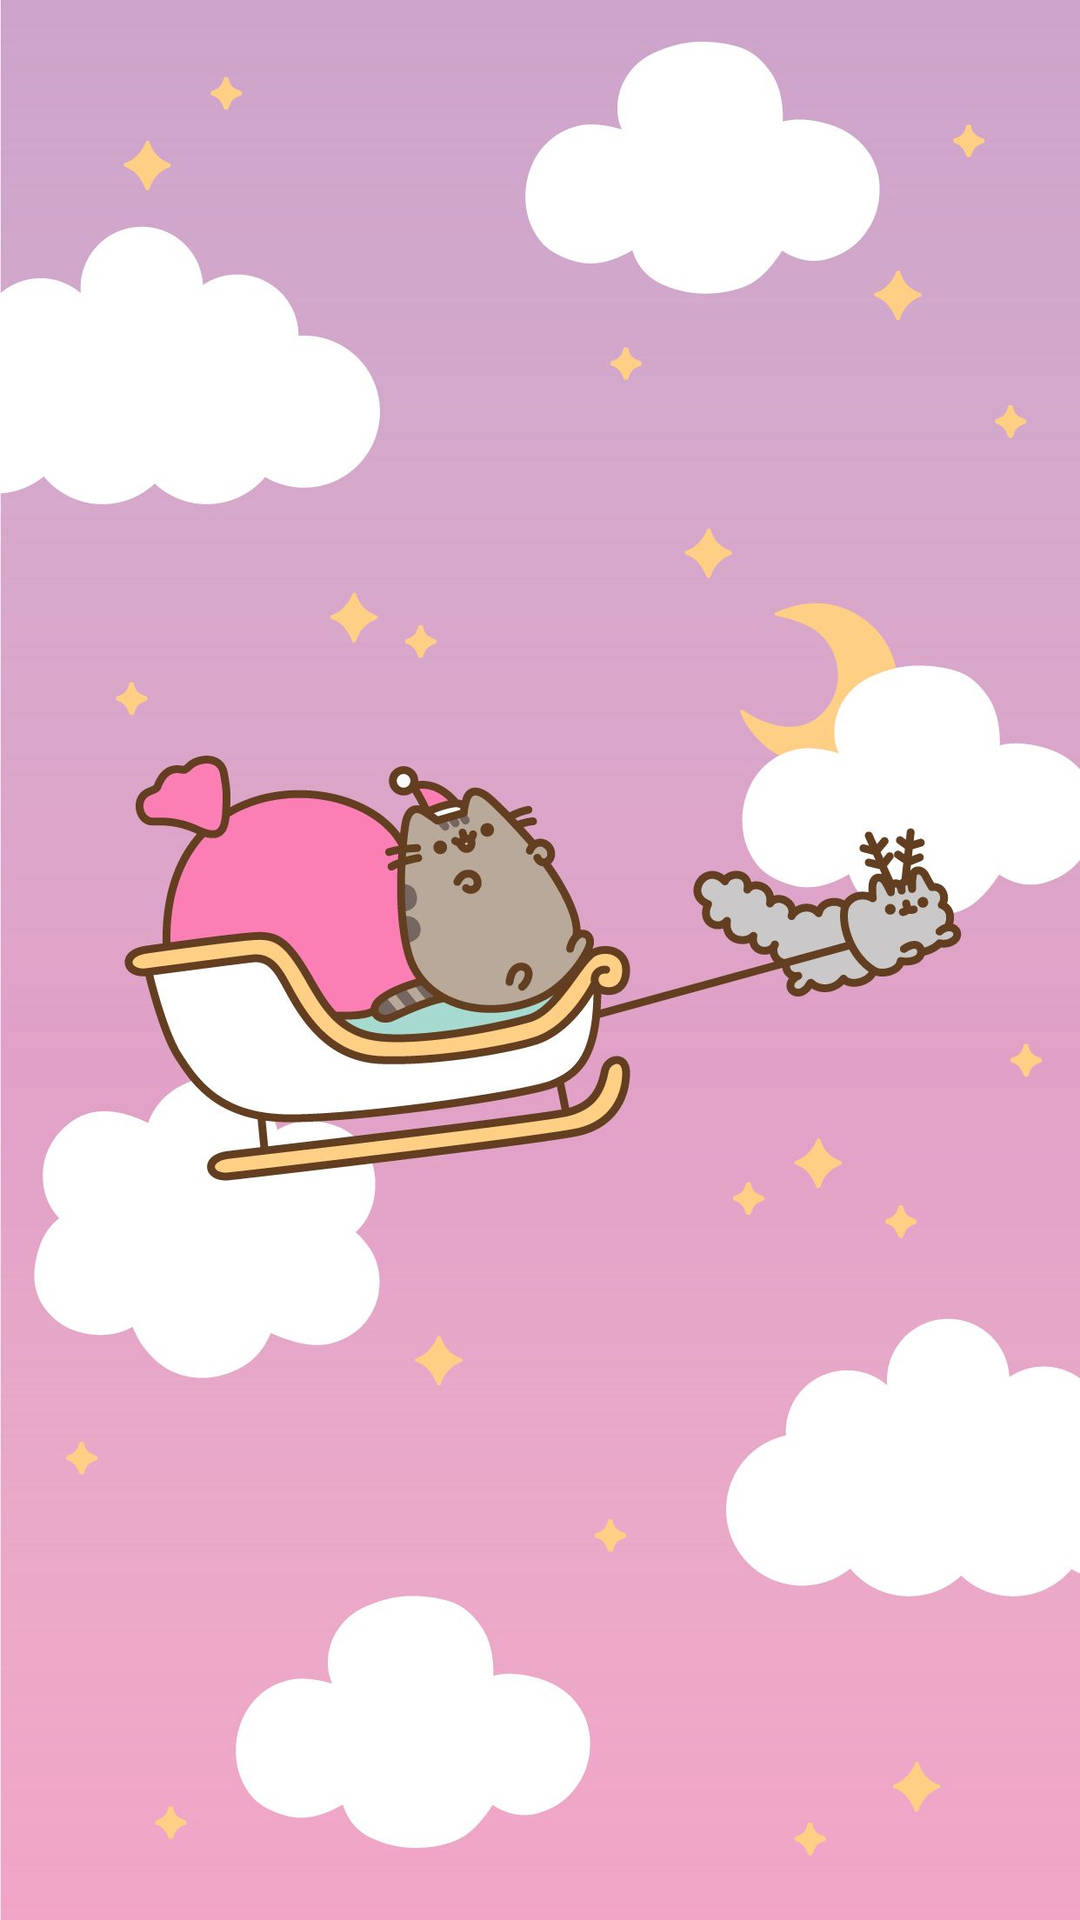 Pusheen and Stormy out for a winter sleigh ride Wallpaper